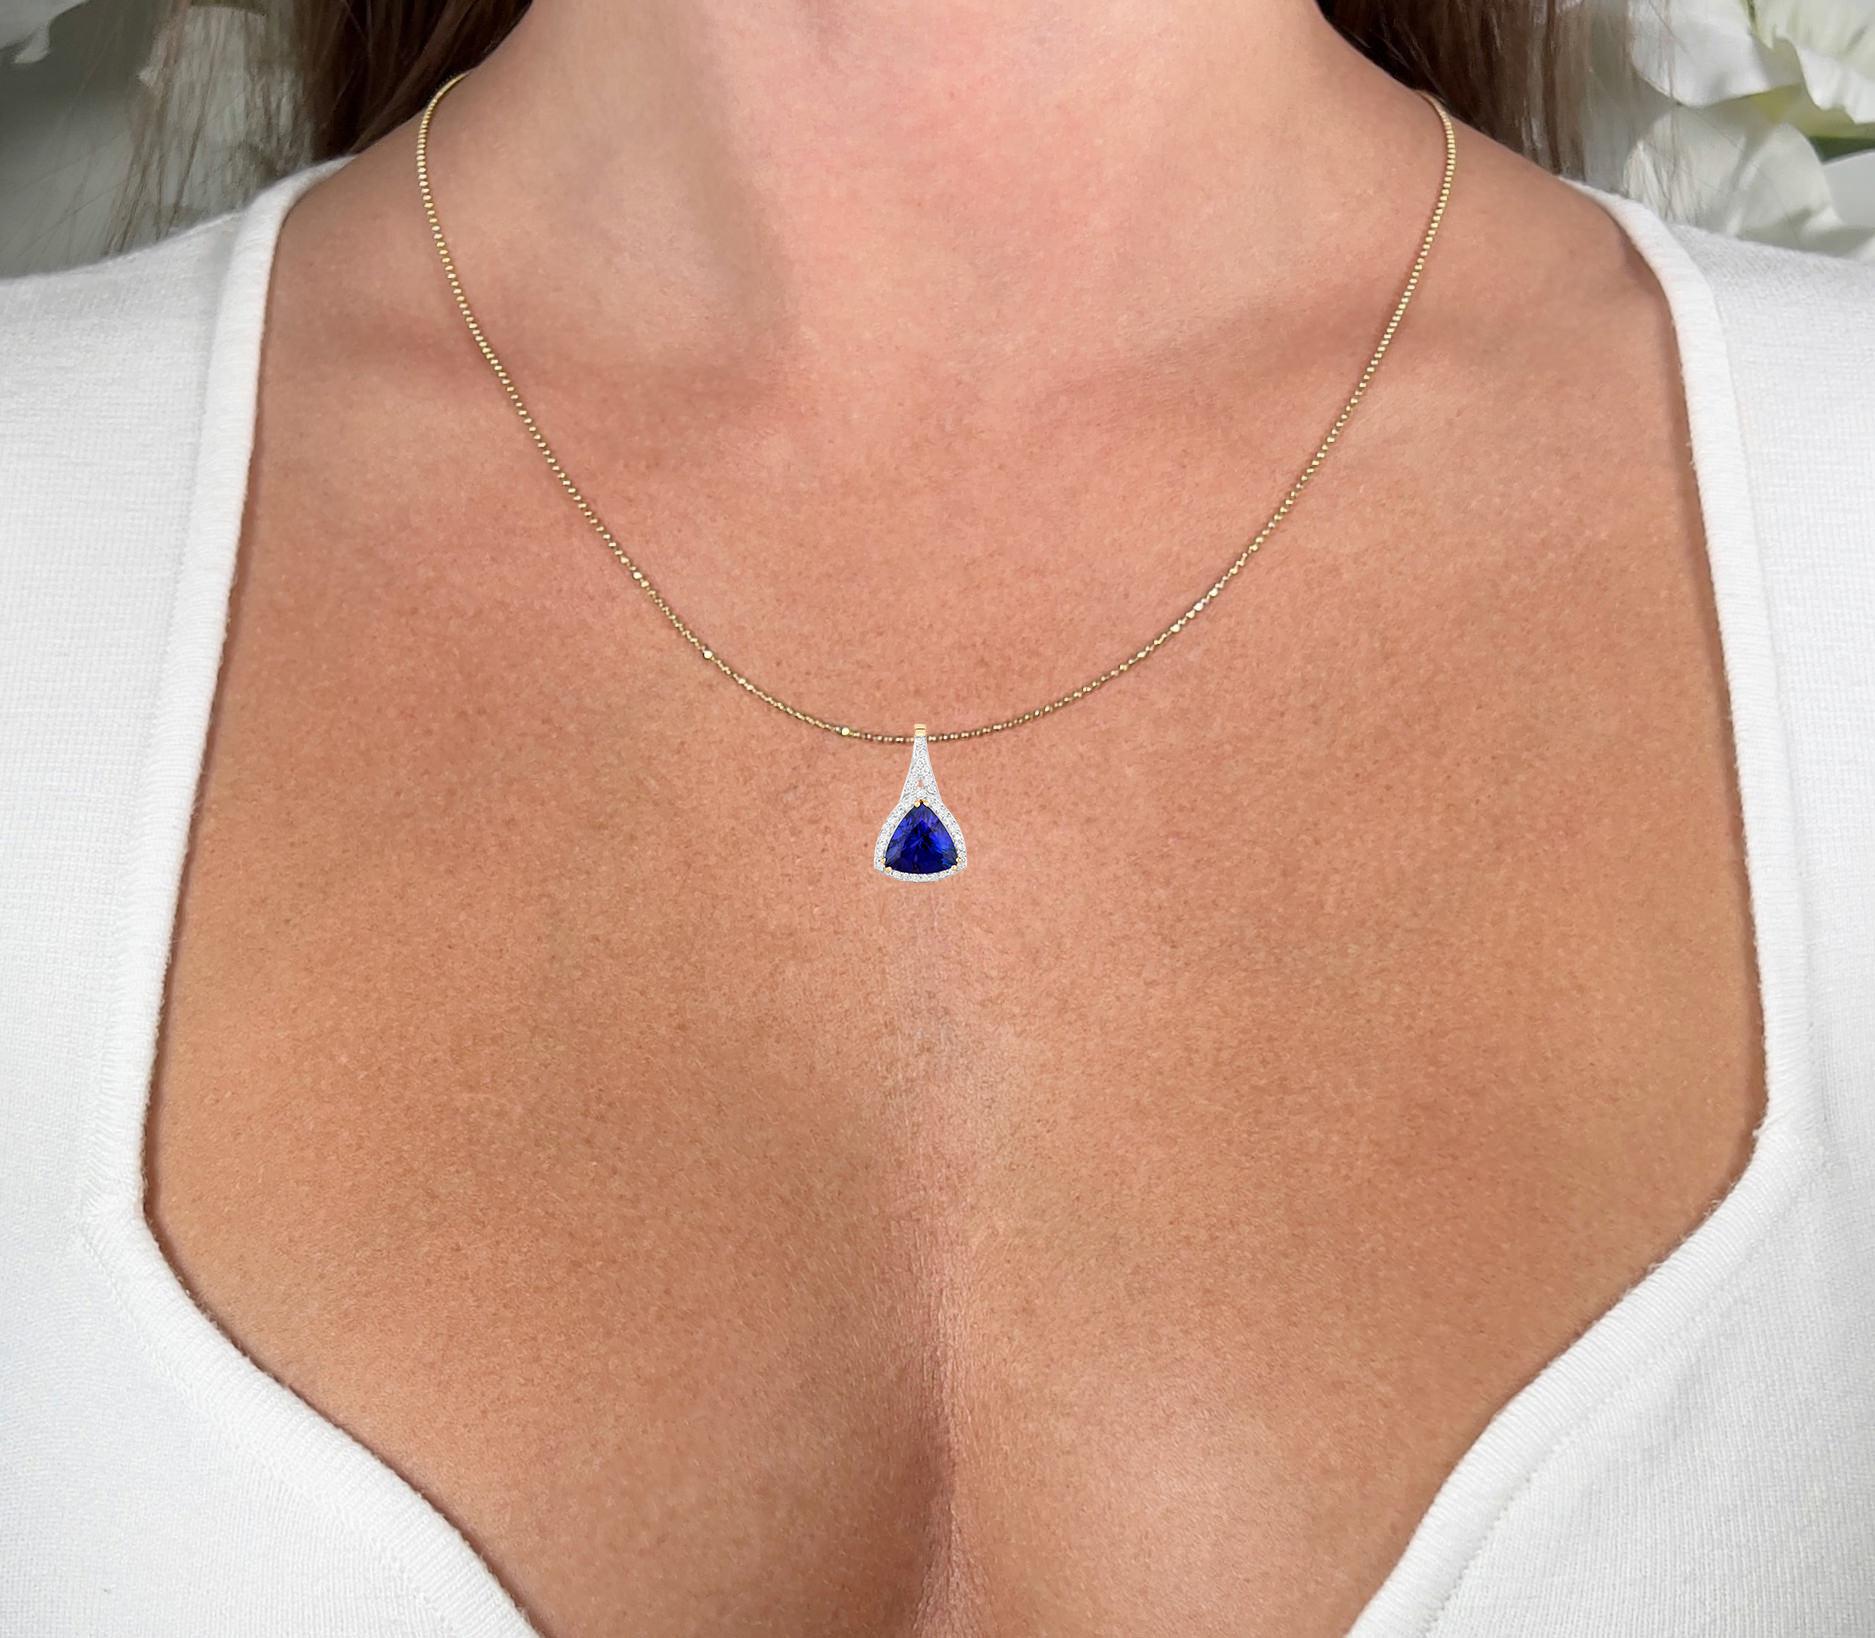 It comes with the Gemological Appraisal by GIA GG/AJP
All Gemstones are Natural
Trillion Tanzanite = 2.48 Carat
36 Round Diamonds = 0.16 Carats
Metal: 14K Yellow Gold
Pendant Dimensions: 19 x 11 mm
